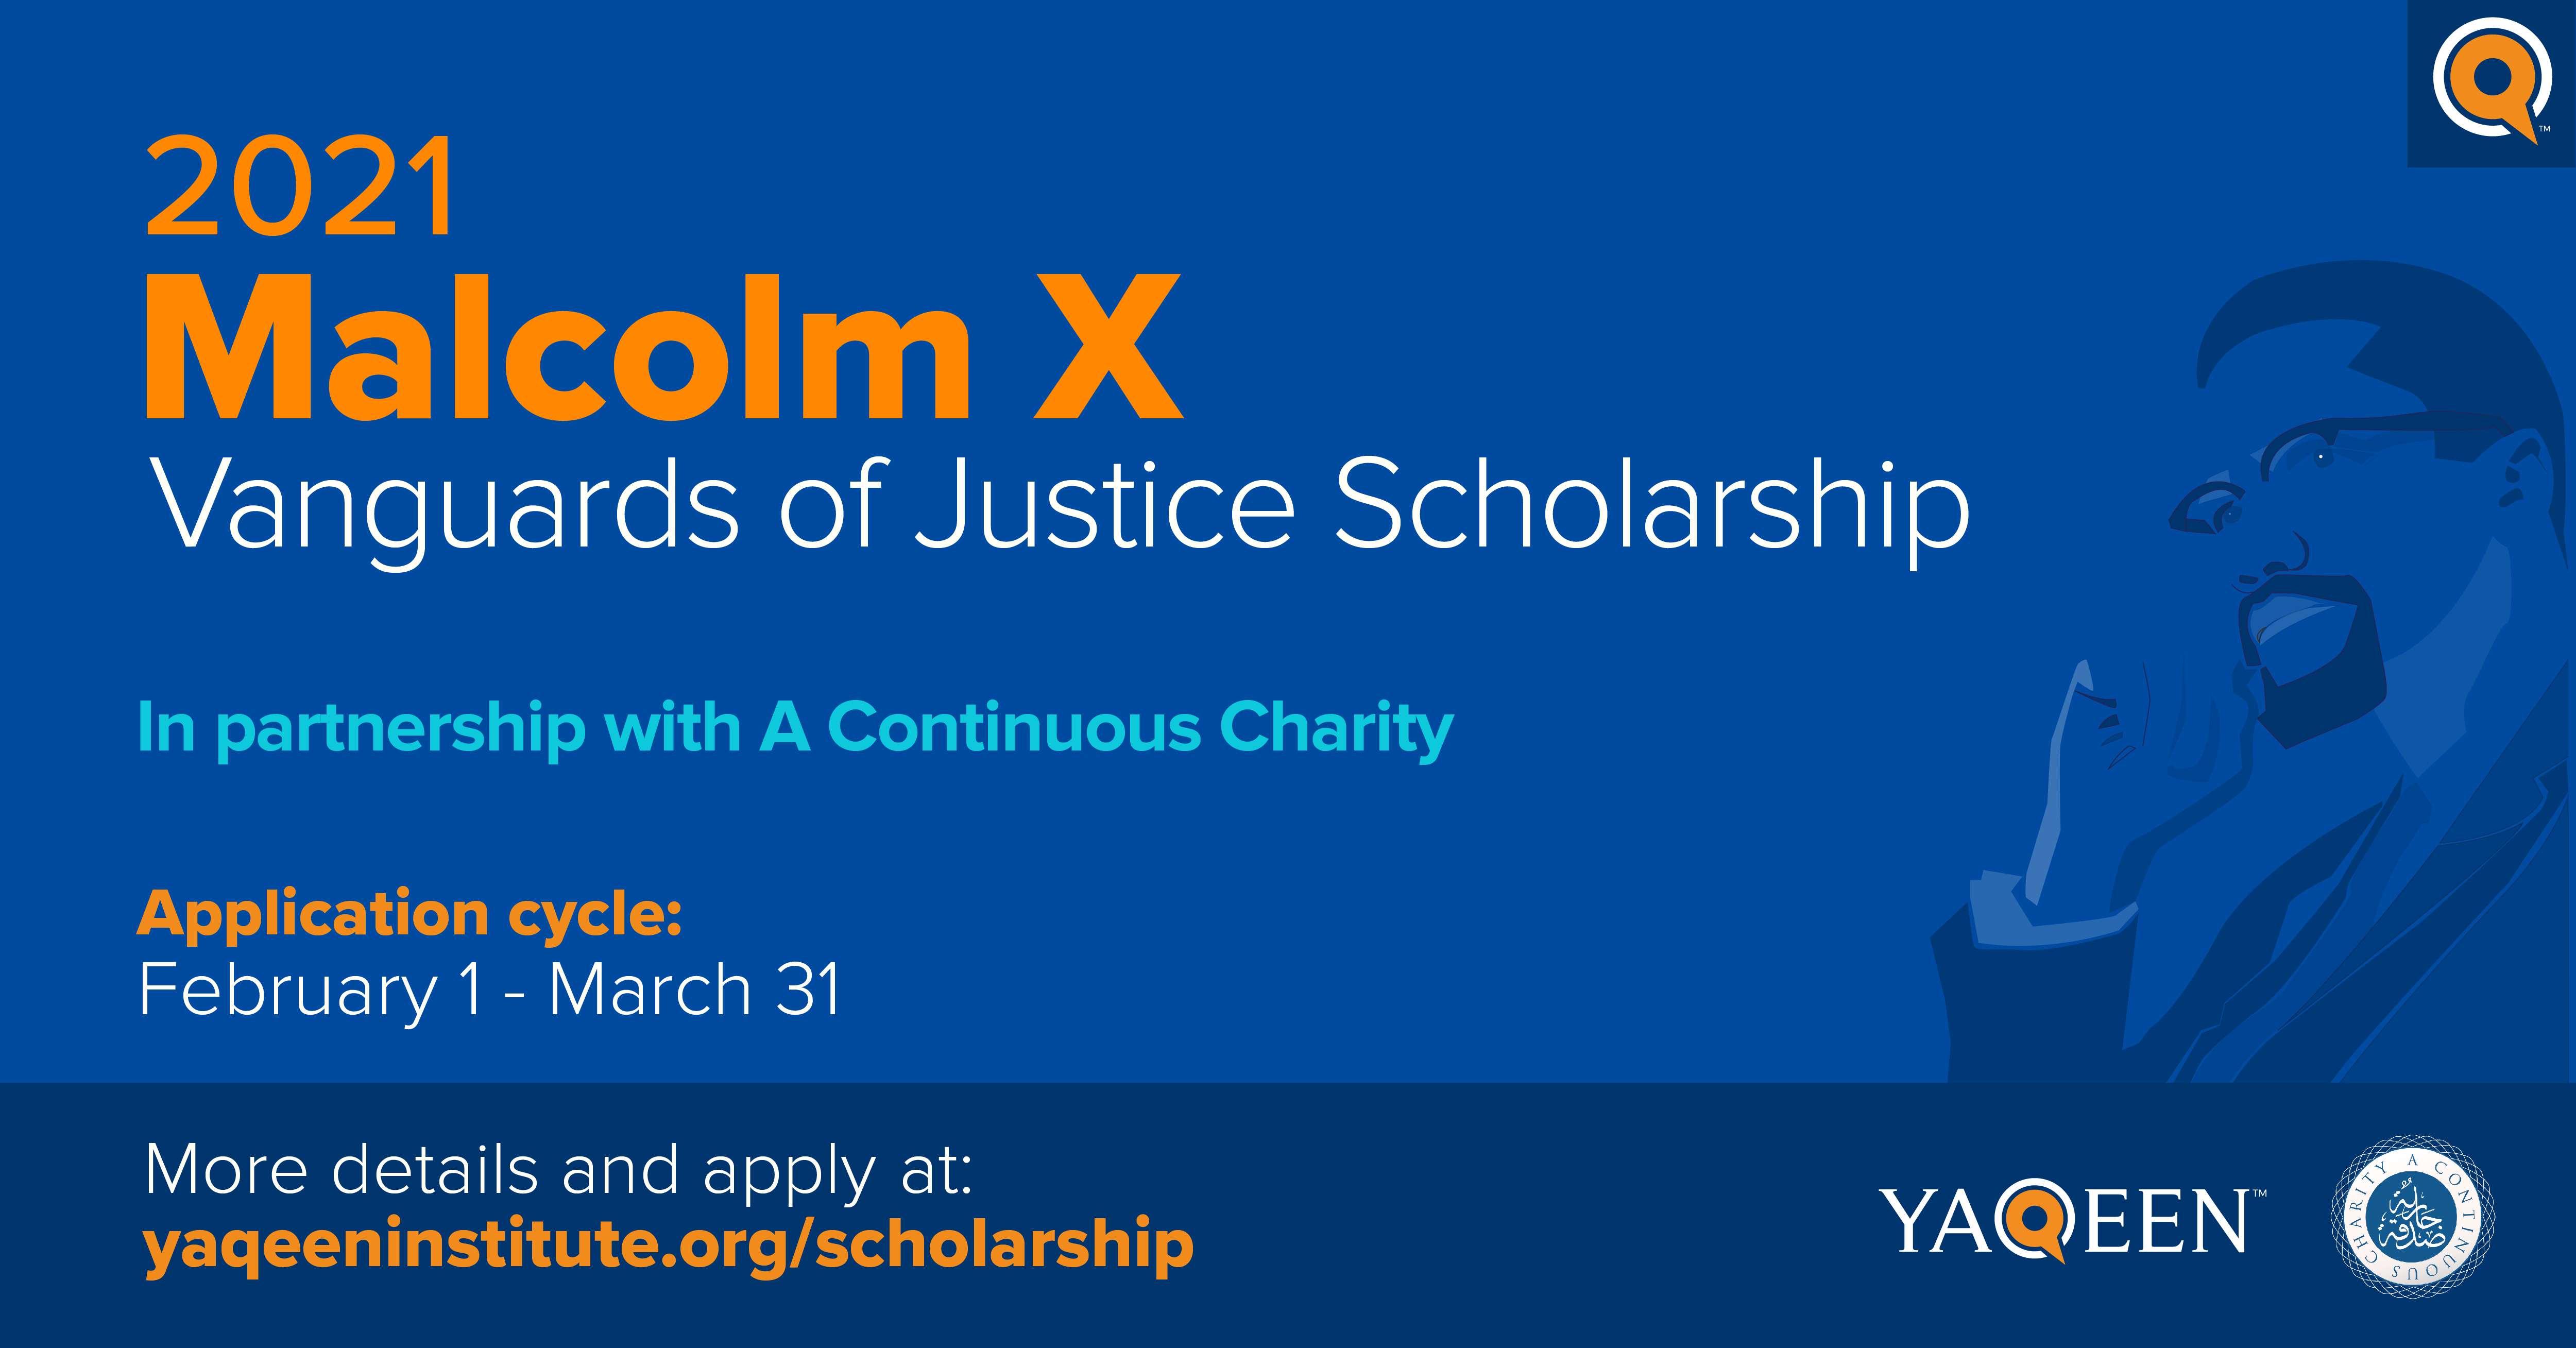 Malcolm X Vanguards of Justice Scholarship